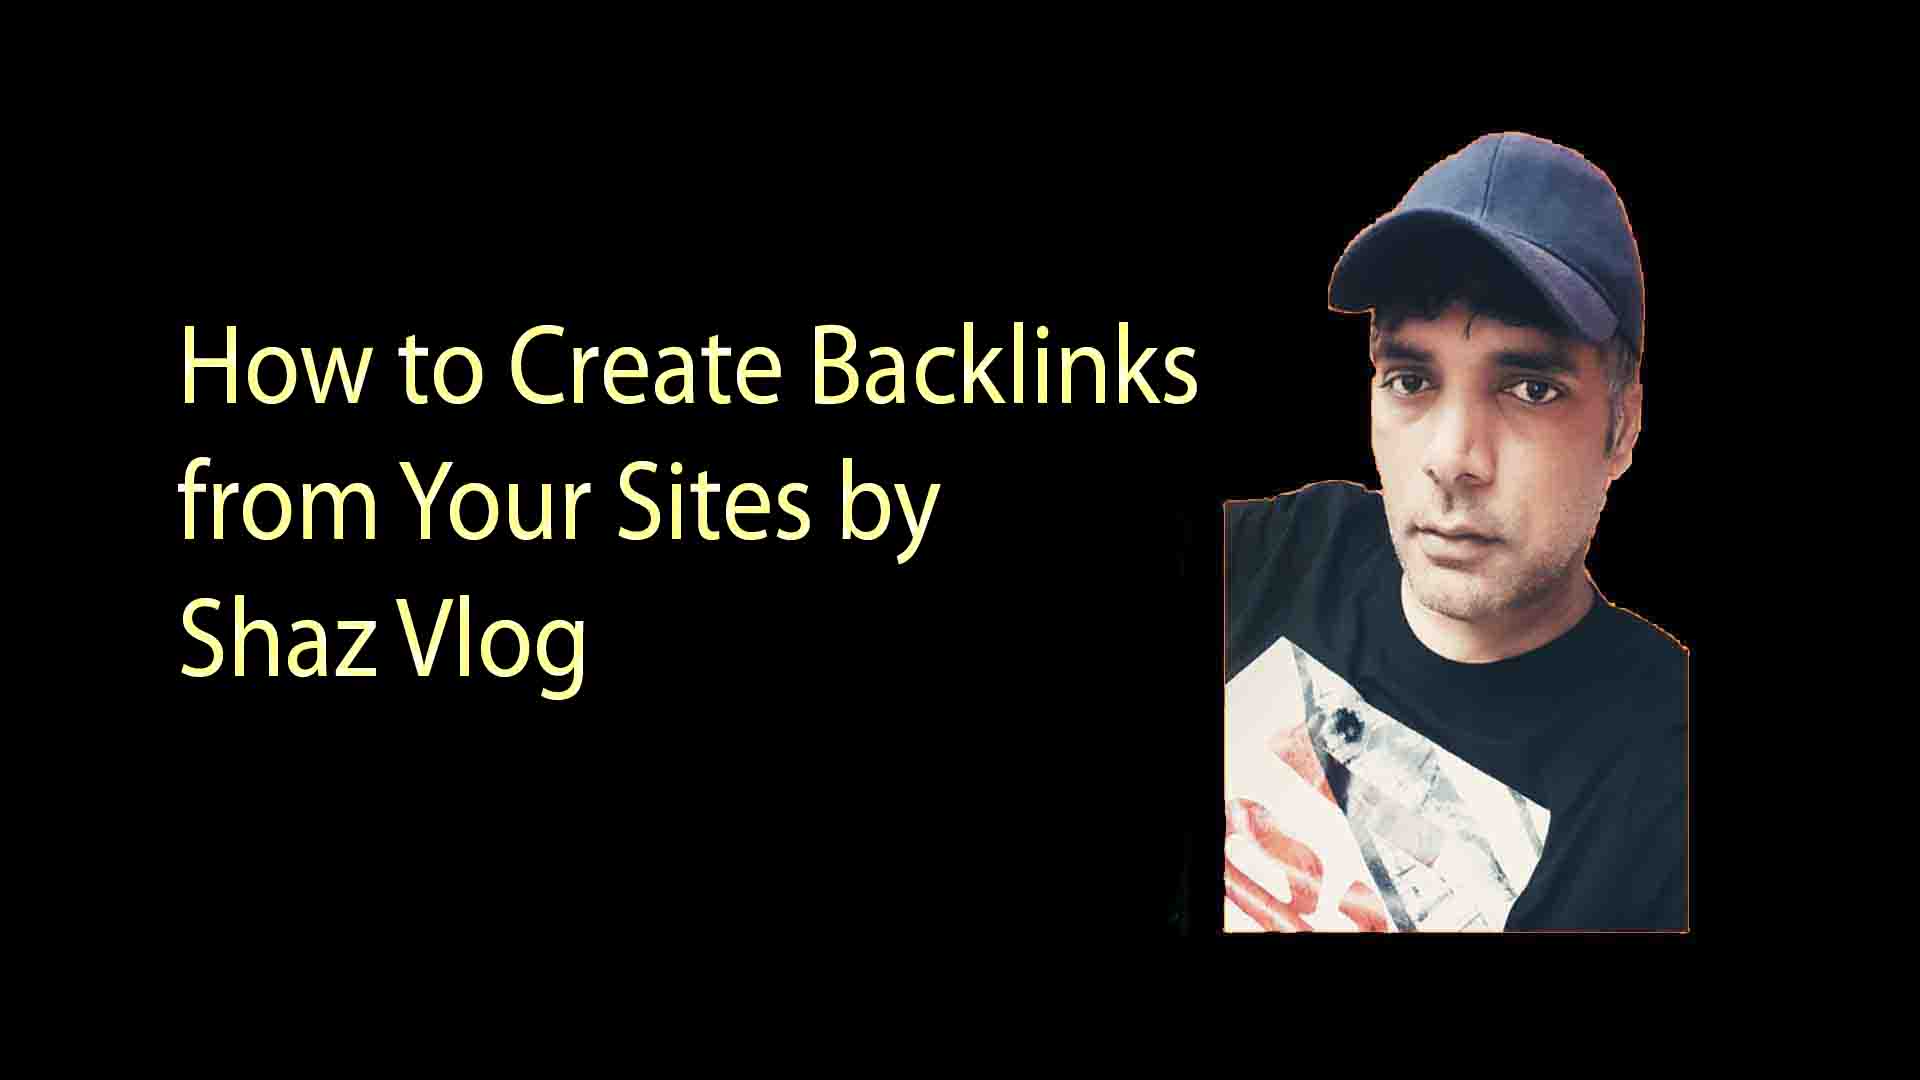 How to Create Backlinks from Your Sites by Shaz Vlog